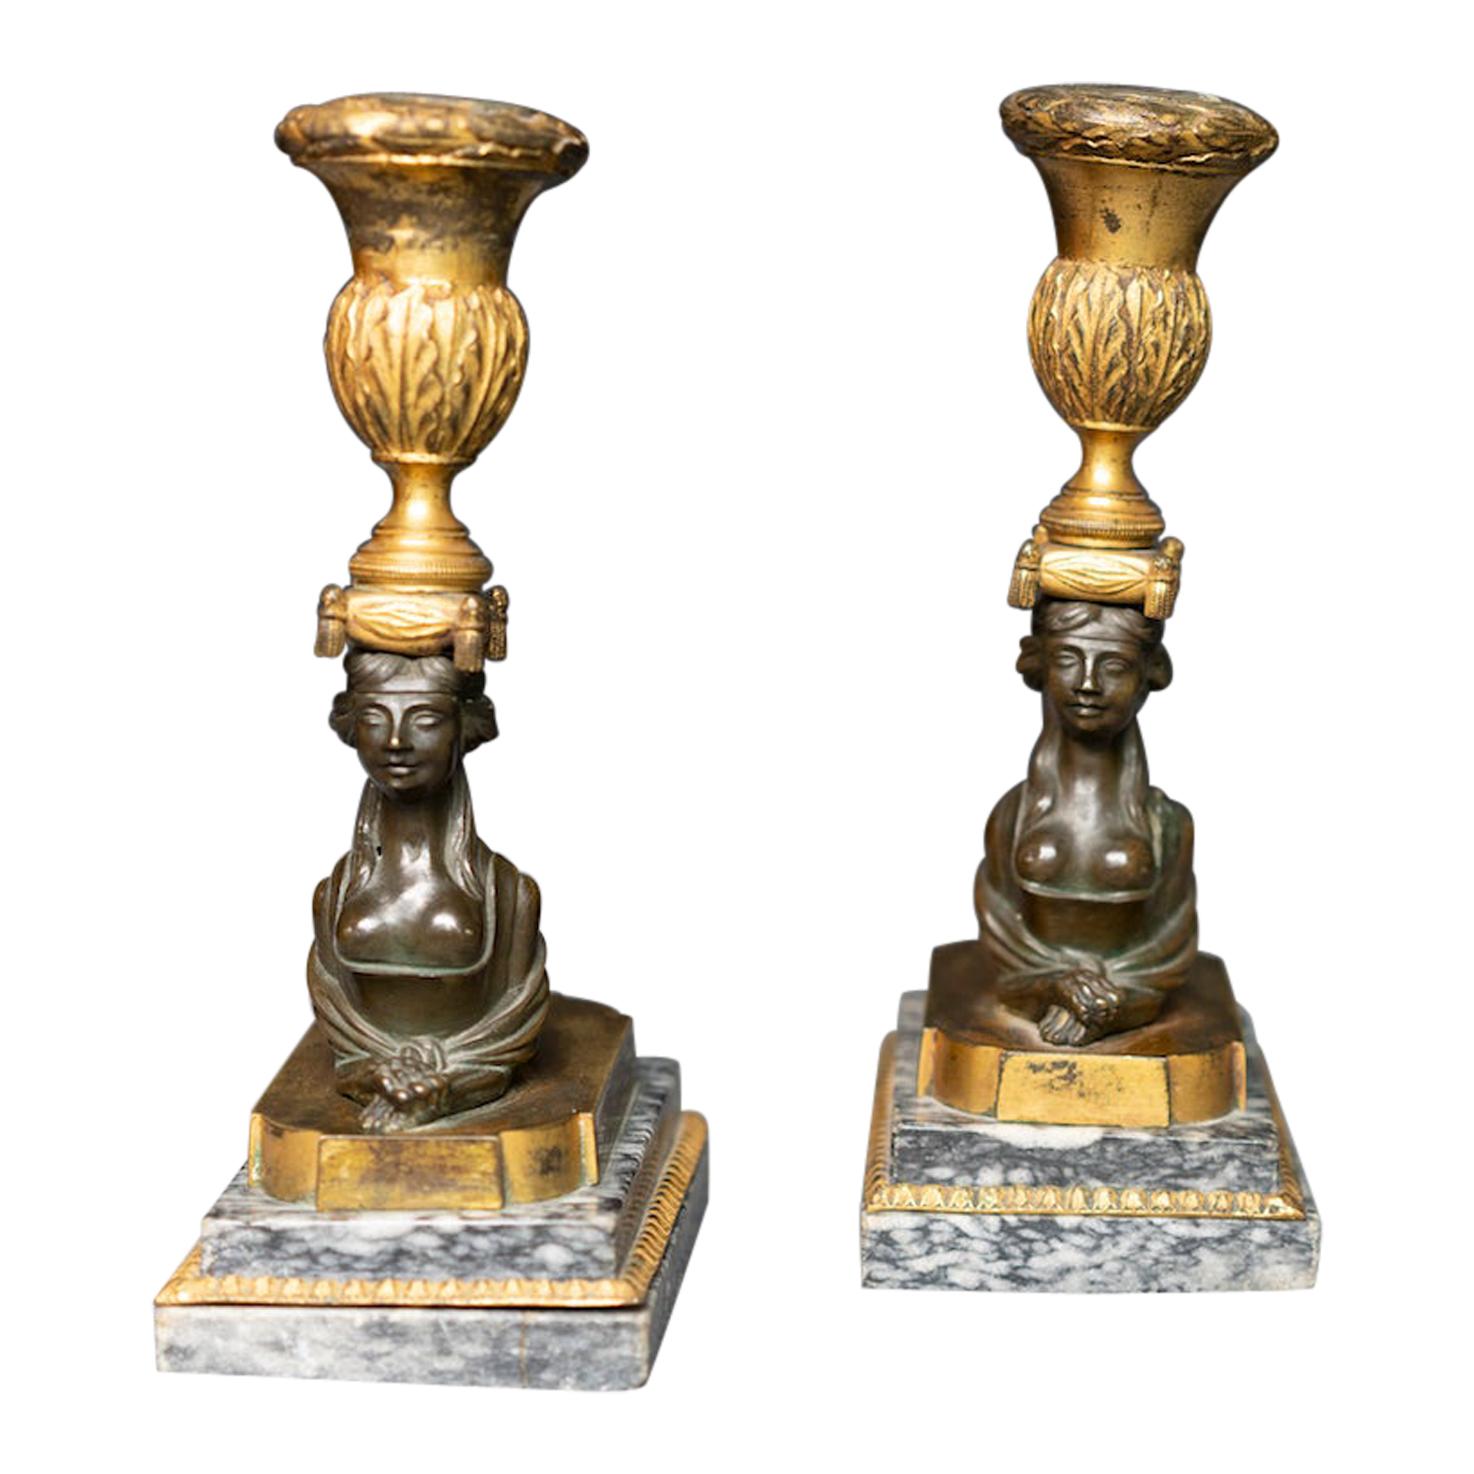 Pair of Russian Neoclassical Gilt and Patinated Bronze Sphinx Candlesticks